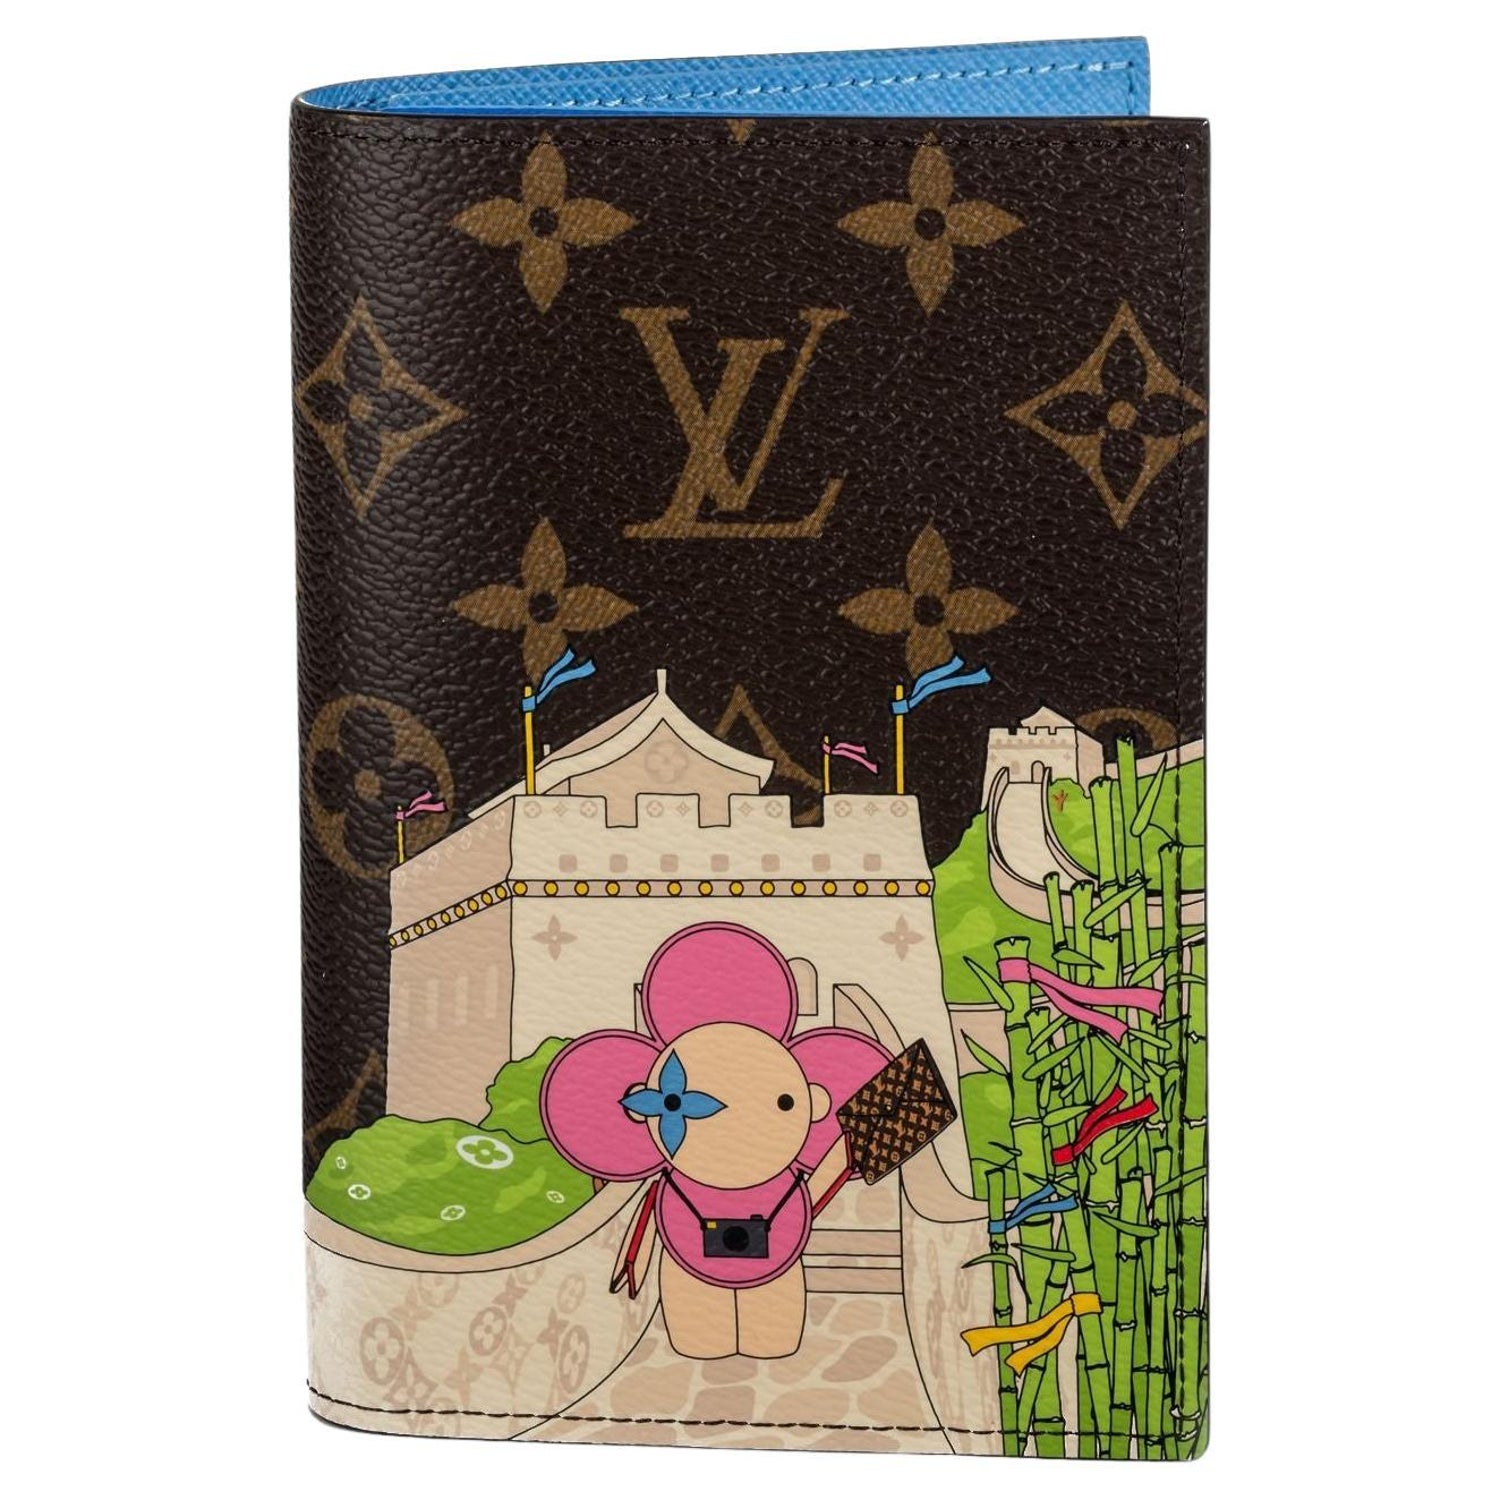 Getting my Louis Vuitton Passport Cover Hot Stamped + LV Stores of